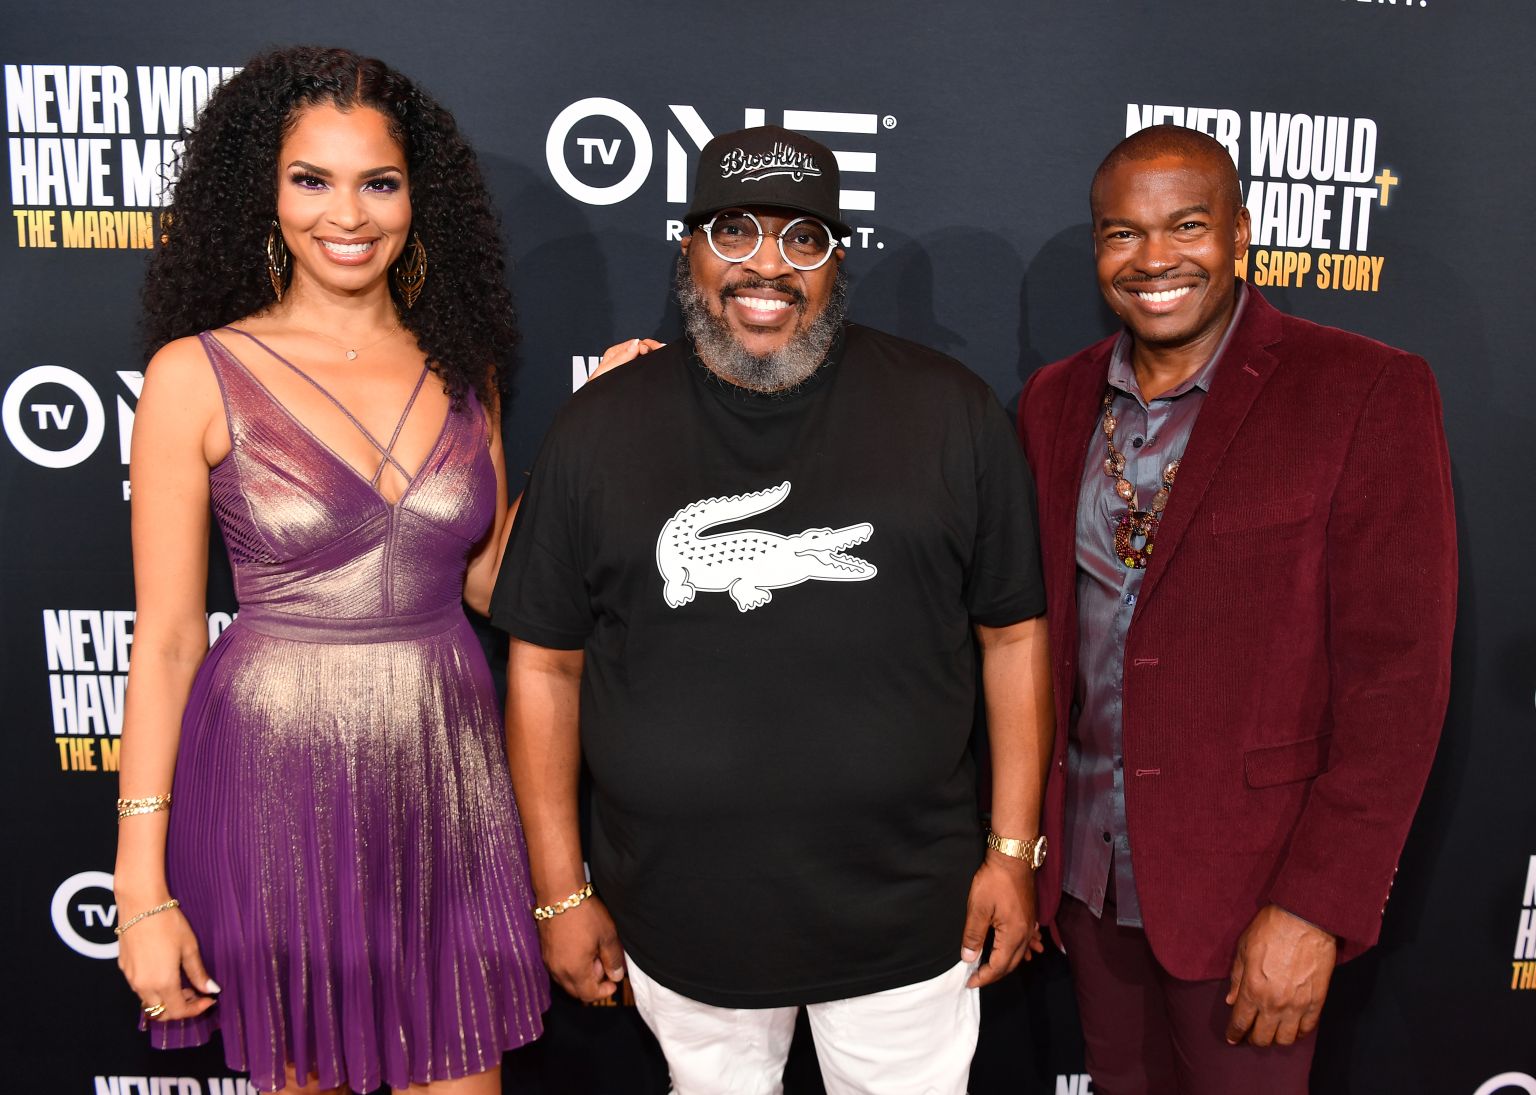 Marvin Sapp's Biopic Cast Say Fans Will Be Surprised By His Story